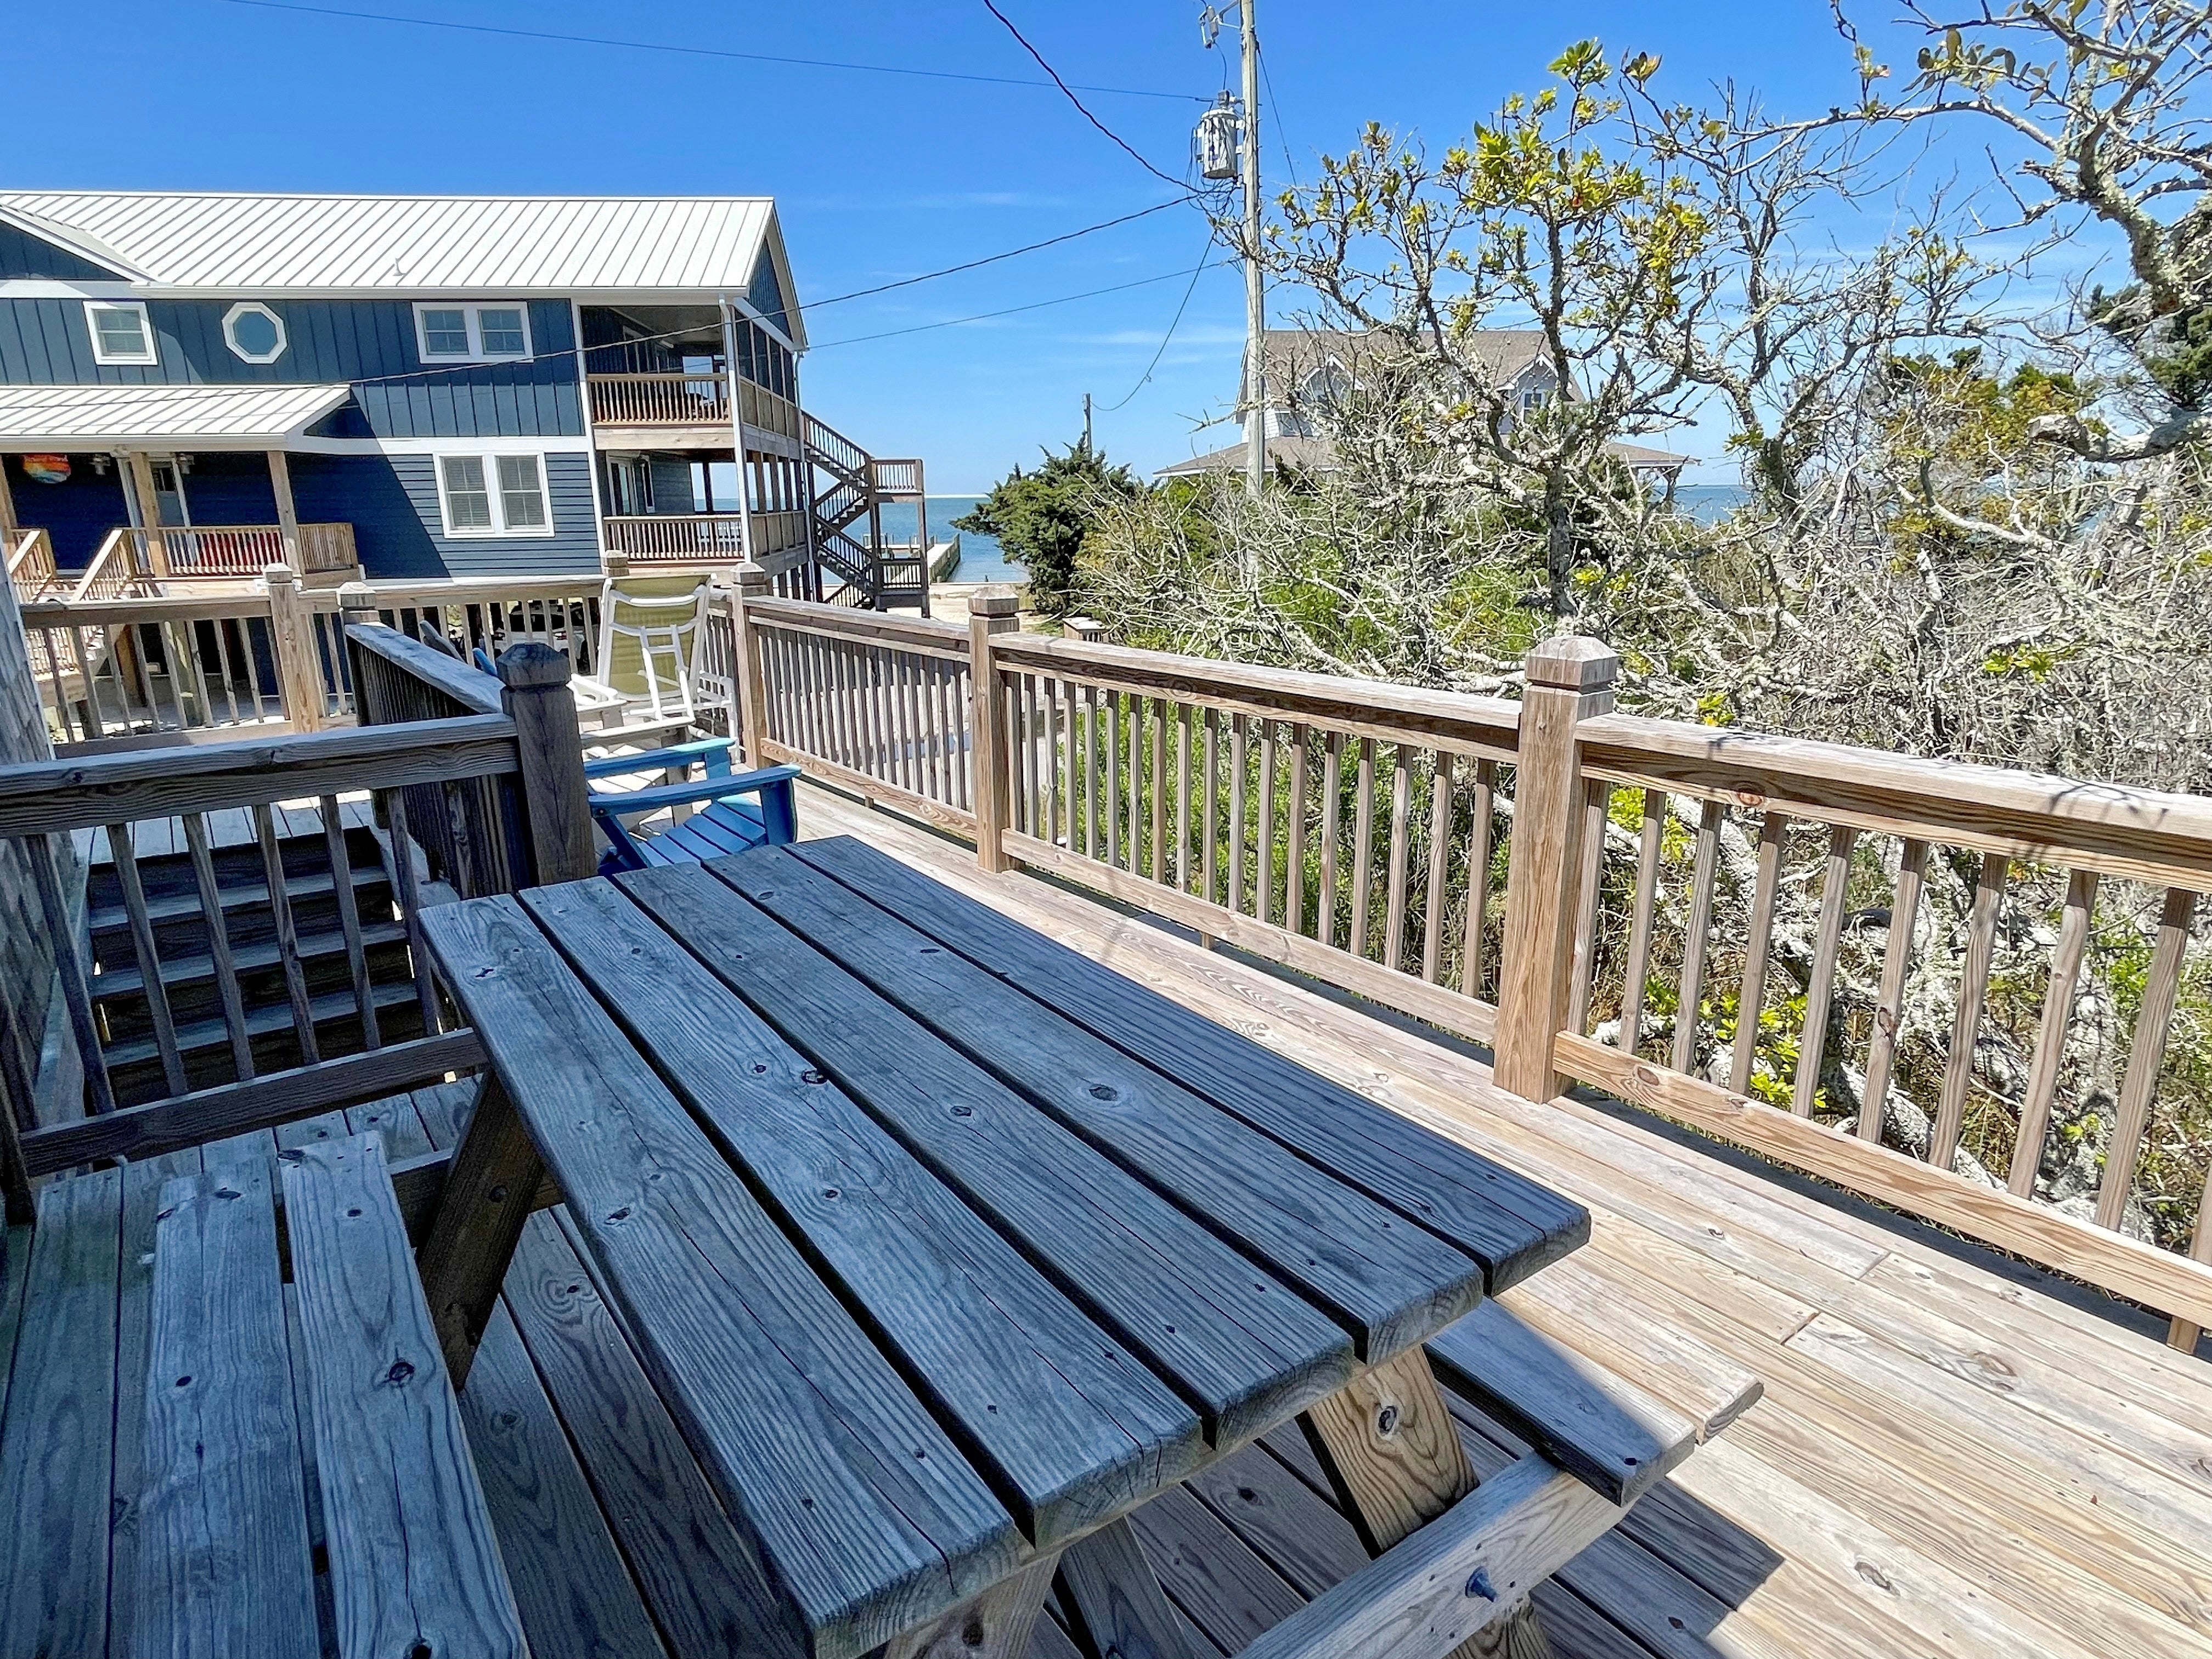 Picnic Table on the Side Deck